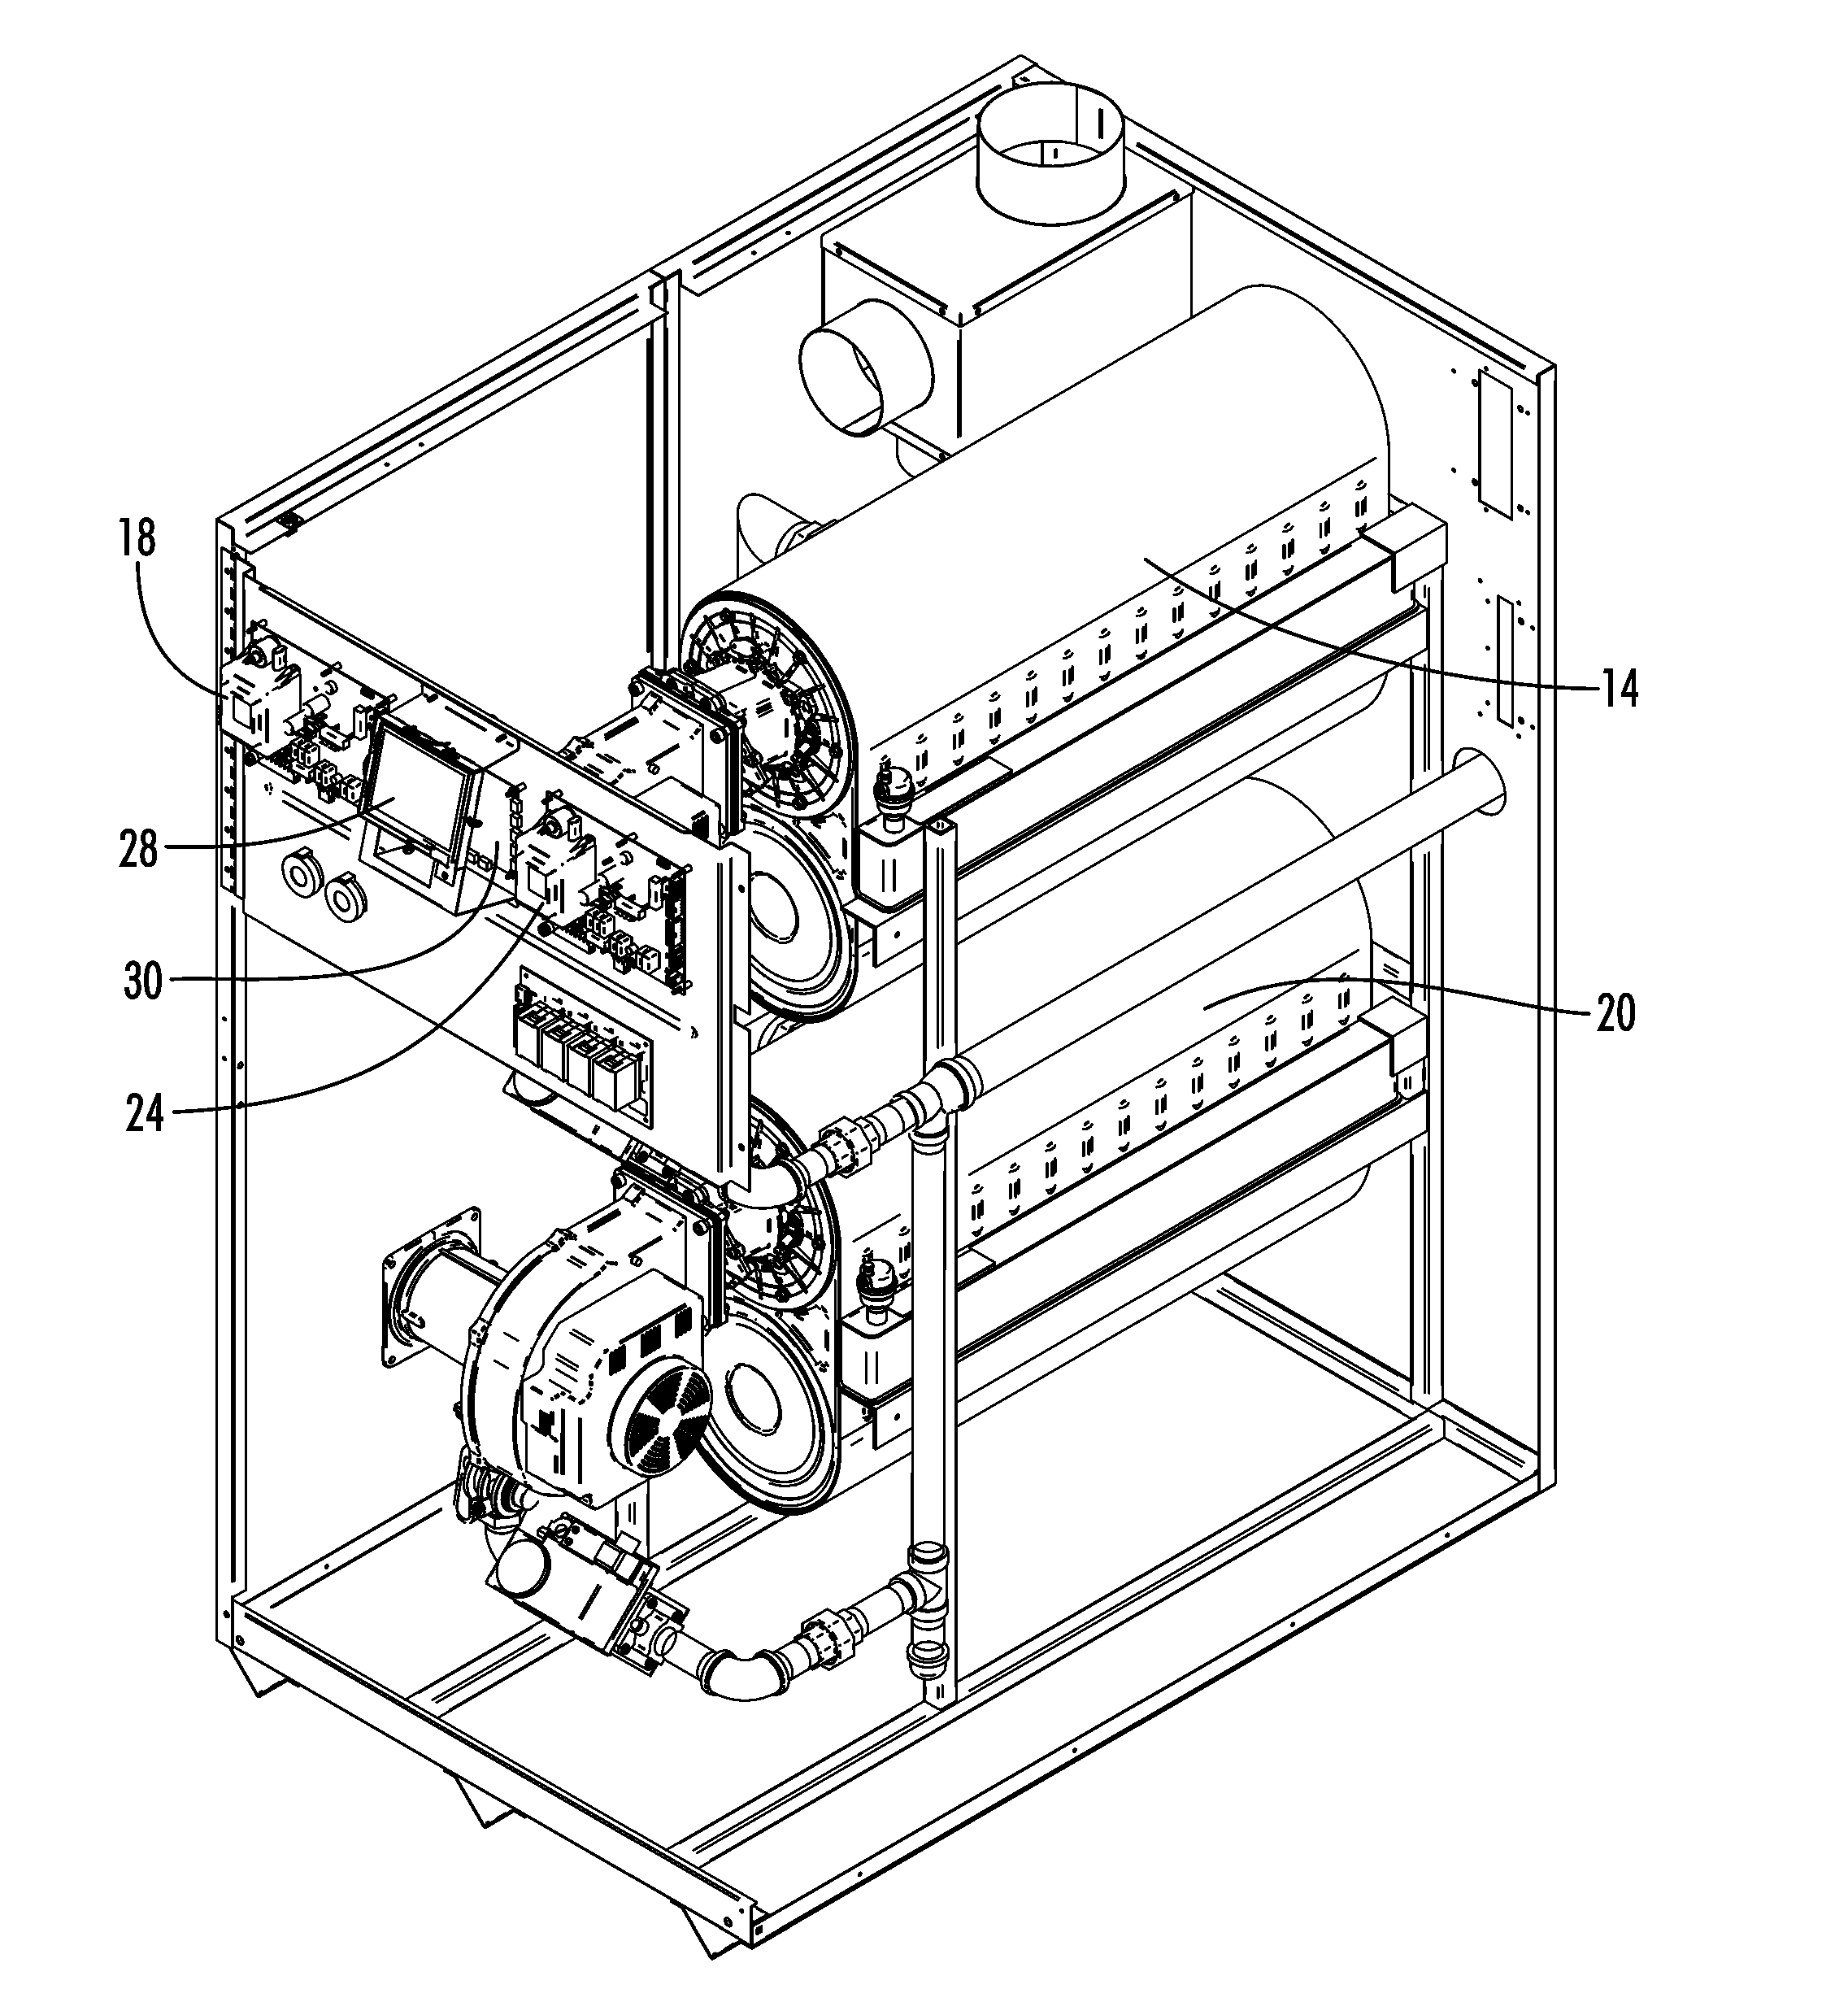 Control System For A Boiler Assembly